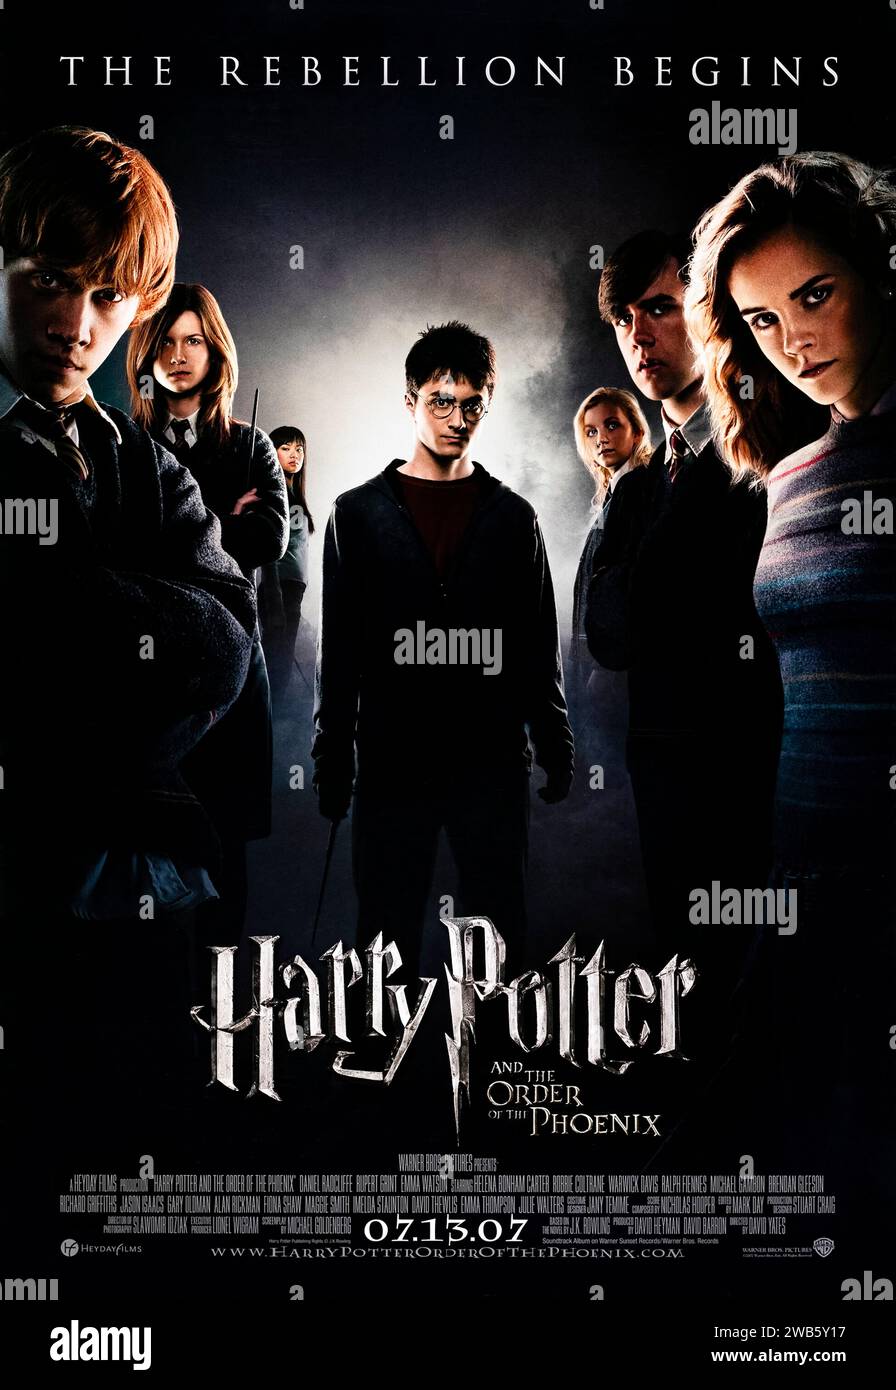 Harry Potter and the Order of the Phoenix (2007) directed by David Yates and starring Daniel Radcliffe, Emma Watson and Rupert Grint. With their warning about Lord Voldemort's return scoffed at, Harry and Dumbledore are targeted by the Wizard authorities as an authoritarian bureaucrat slowly seizes power at Hogwarts. US advance poster. ***EDITORIAL USE ONLY*** Credit: BFA / Warner Bros Stock Photo